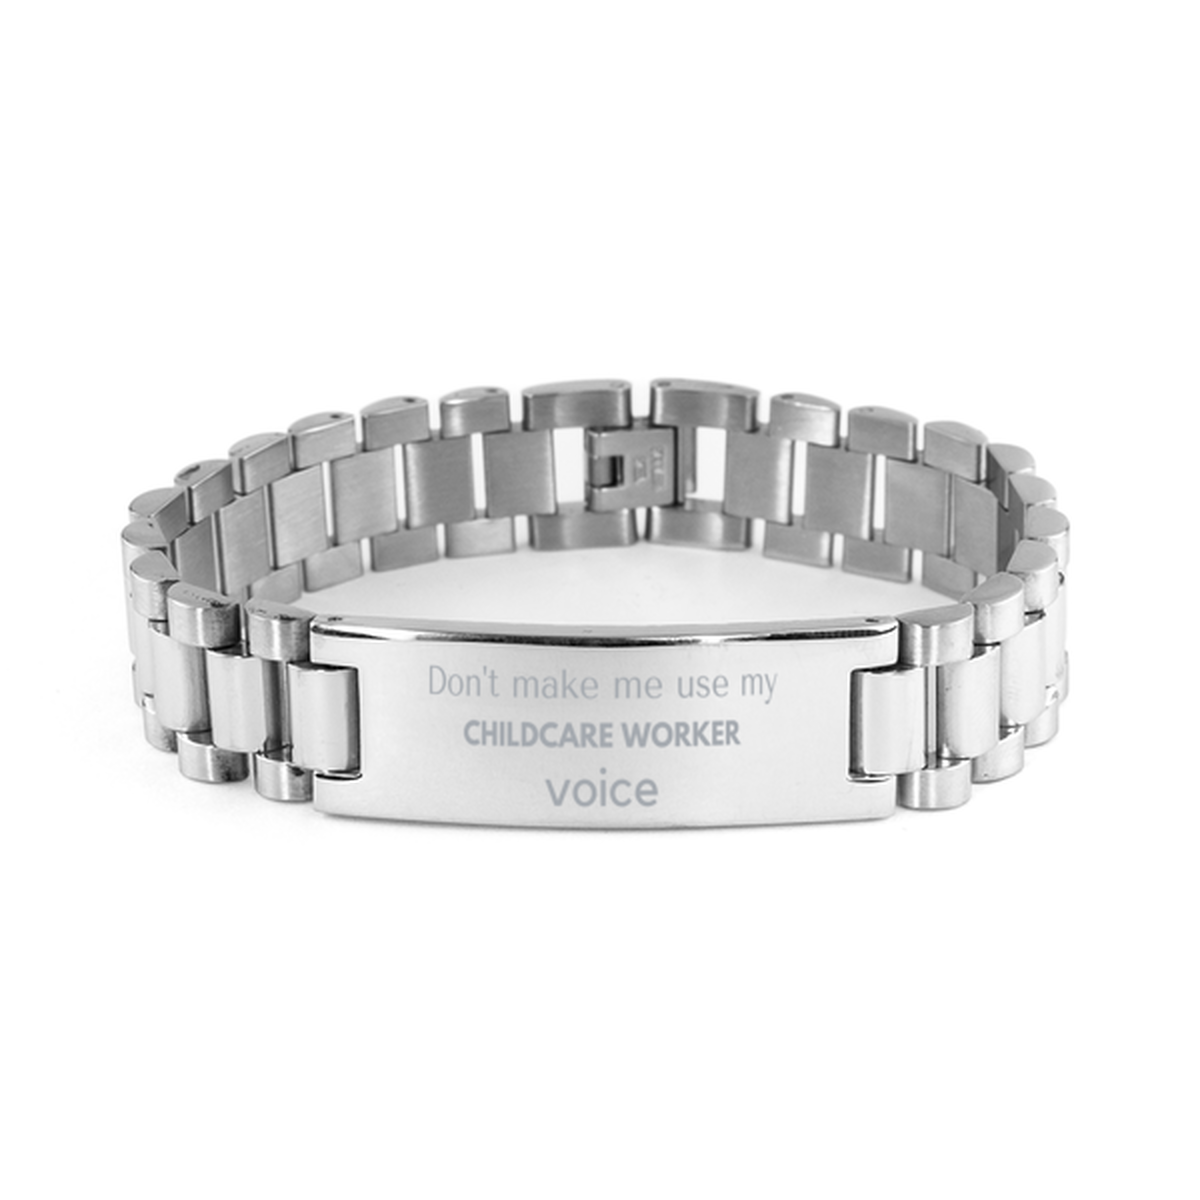 Don't make me use my Childcare Worker voice, Sarcasm Childcare Worker Gifts, Christmas Childcare Worker Ladder Stainless Steel Bracelet Birthday Unique Gifts For Childcare Worker Coworkers, Men, Women, Colleague, Friends